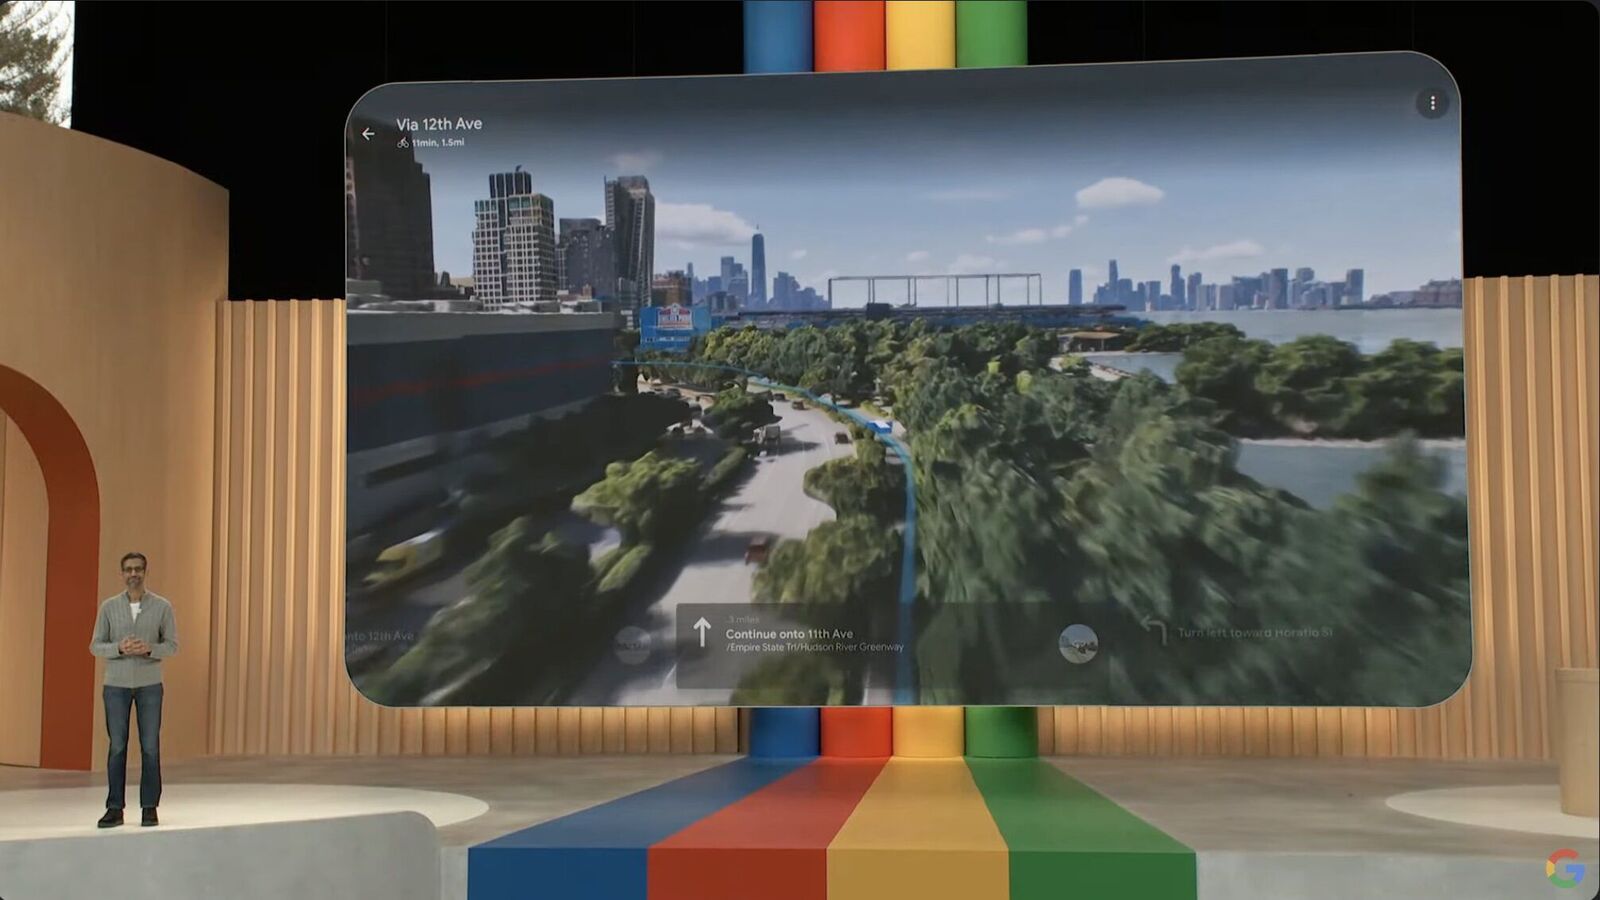 Google Maps' Cool New Tool Turns Your Real City Into A Game